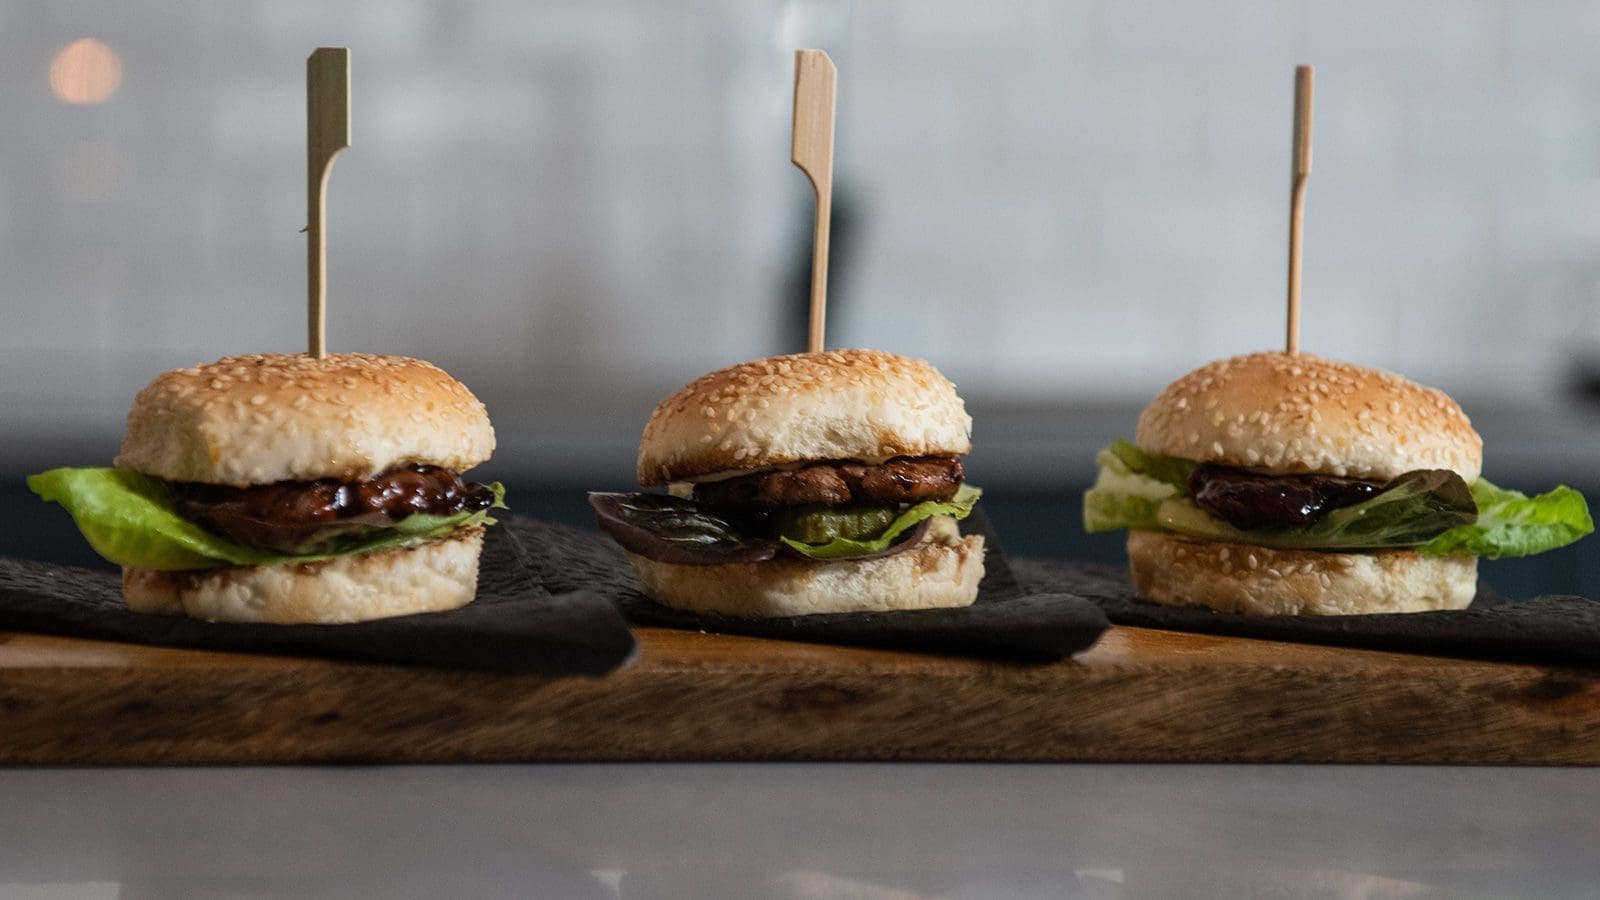 SA based food tech company Mzansi Meat launches Africa’s first cultivated beef burger